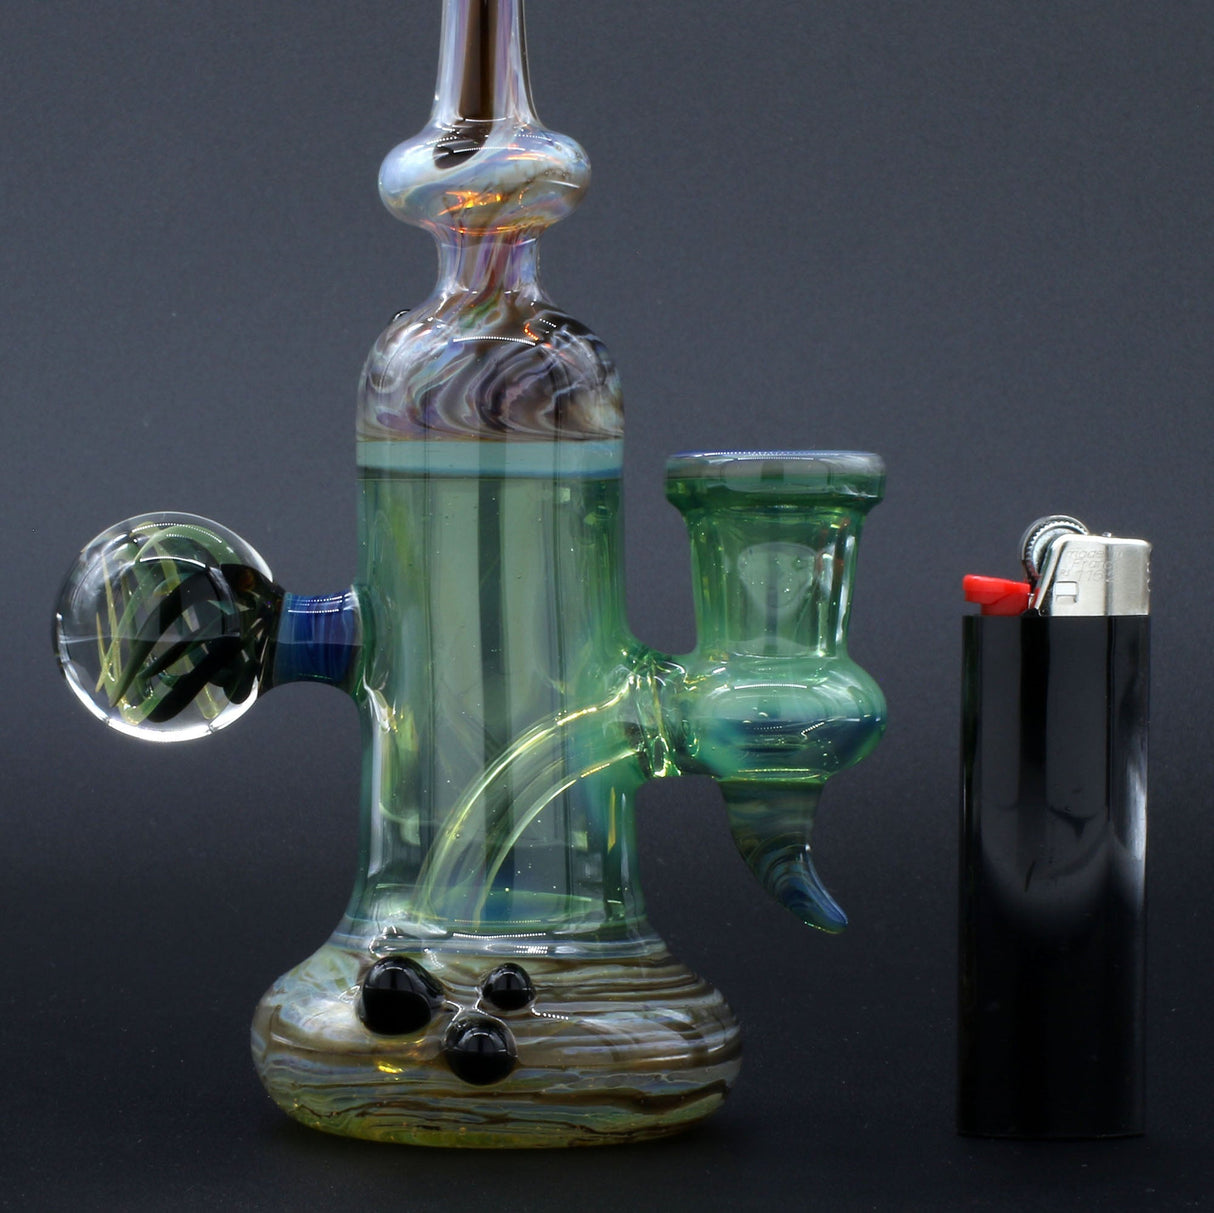 Clayball Glass "Enclave Nebula" Heady Sherlock Dab-Rig with intricate design, side view next to lighter